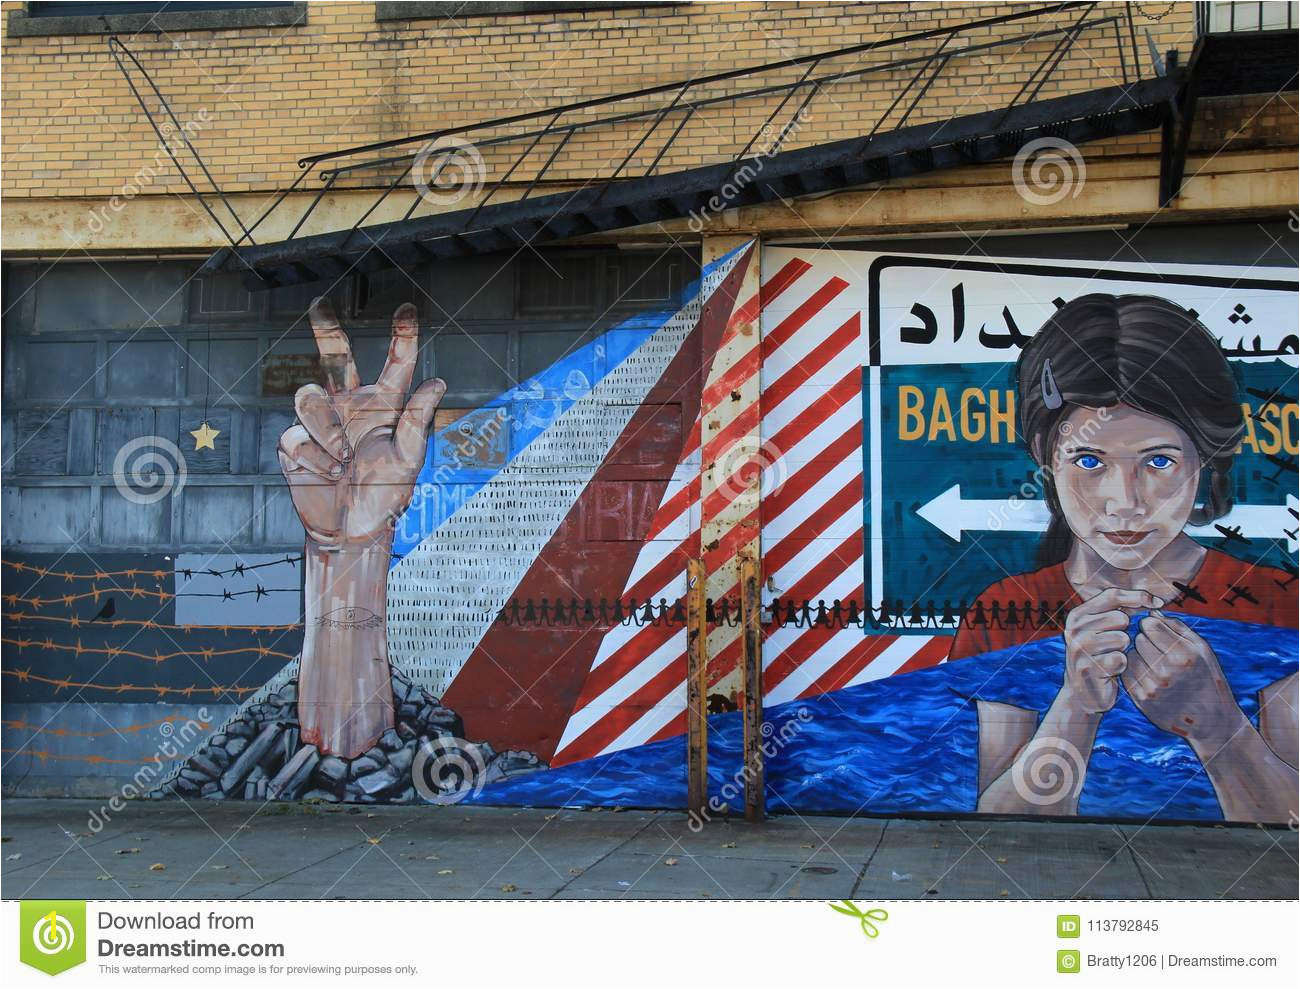 Painting Murals On Brick Walls Impressive Street Art with Message E S Left to Figure Out